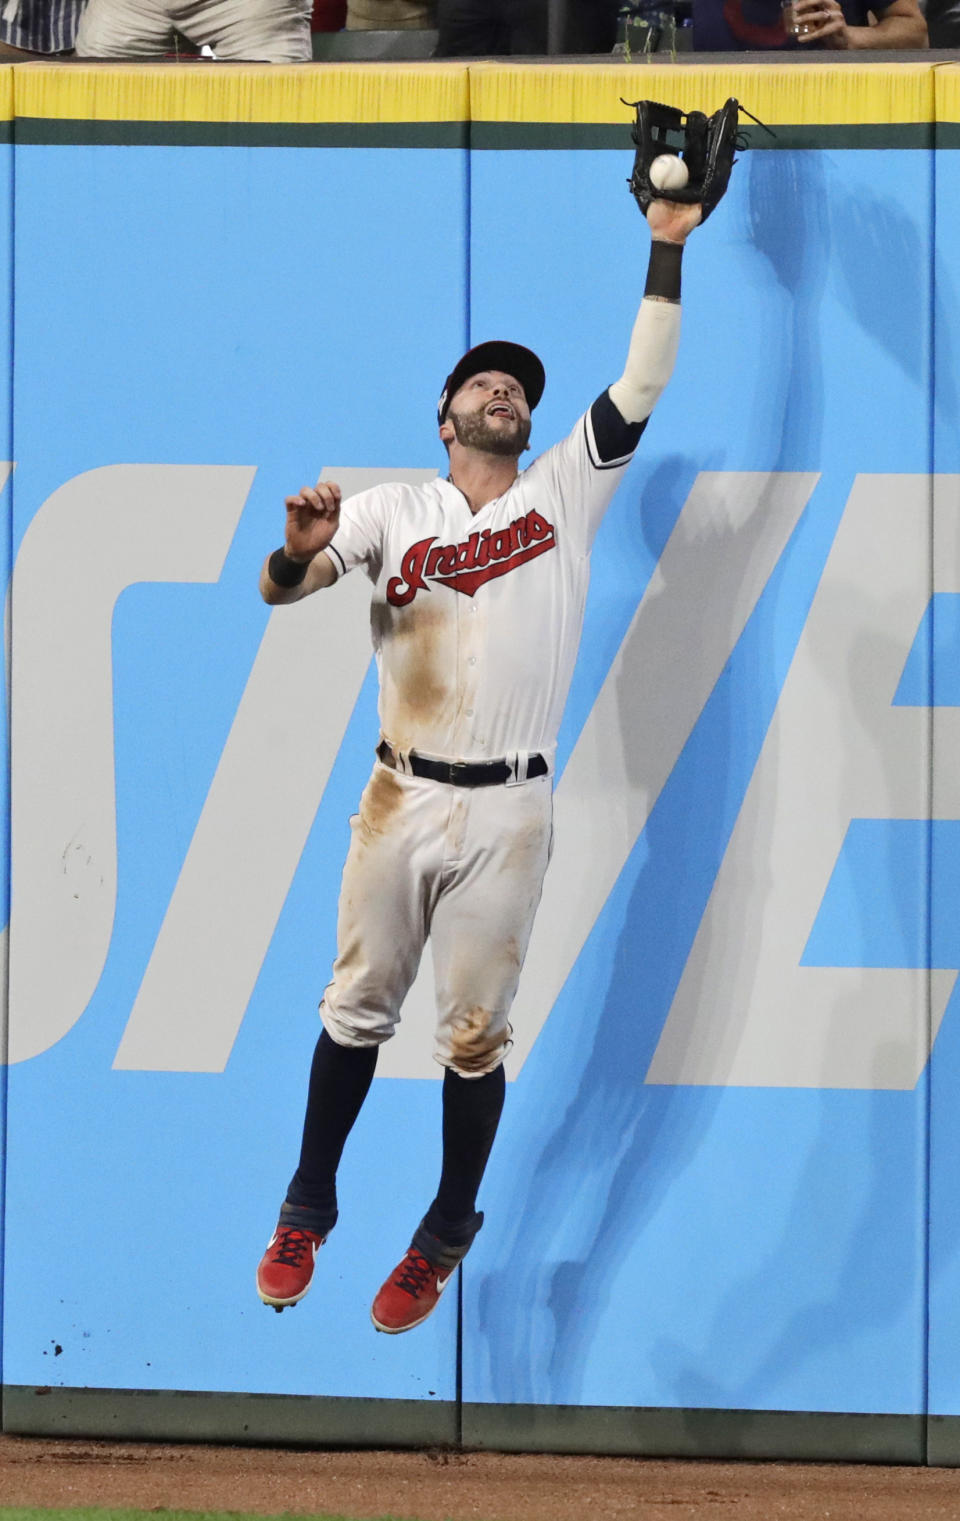 Cleveland Indians' Tyler Naquin catches a ball hit by Boston Red Sox's J.D. Martinez on the eighth inning of a baseball game, Monday, Aug. 12, 2019, in Cleveland. Martinez was out on the play. (AP Photo/Tony Dejak)